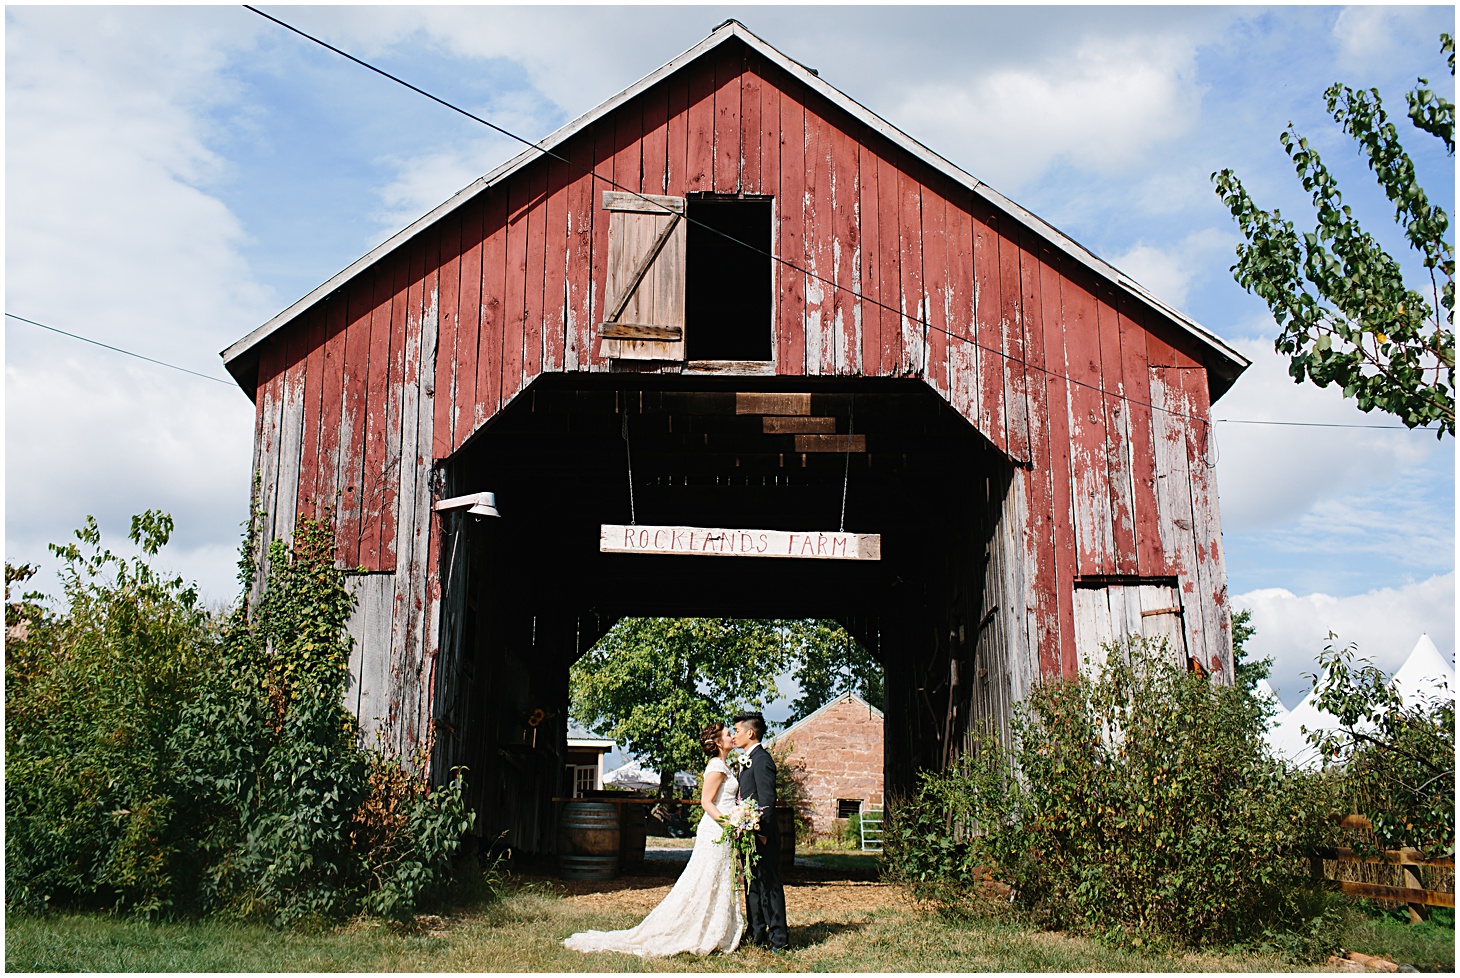 Rustic Floral Wedding at Rocklands Farm & Winery by Sarah Bradshaw Photography_0005